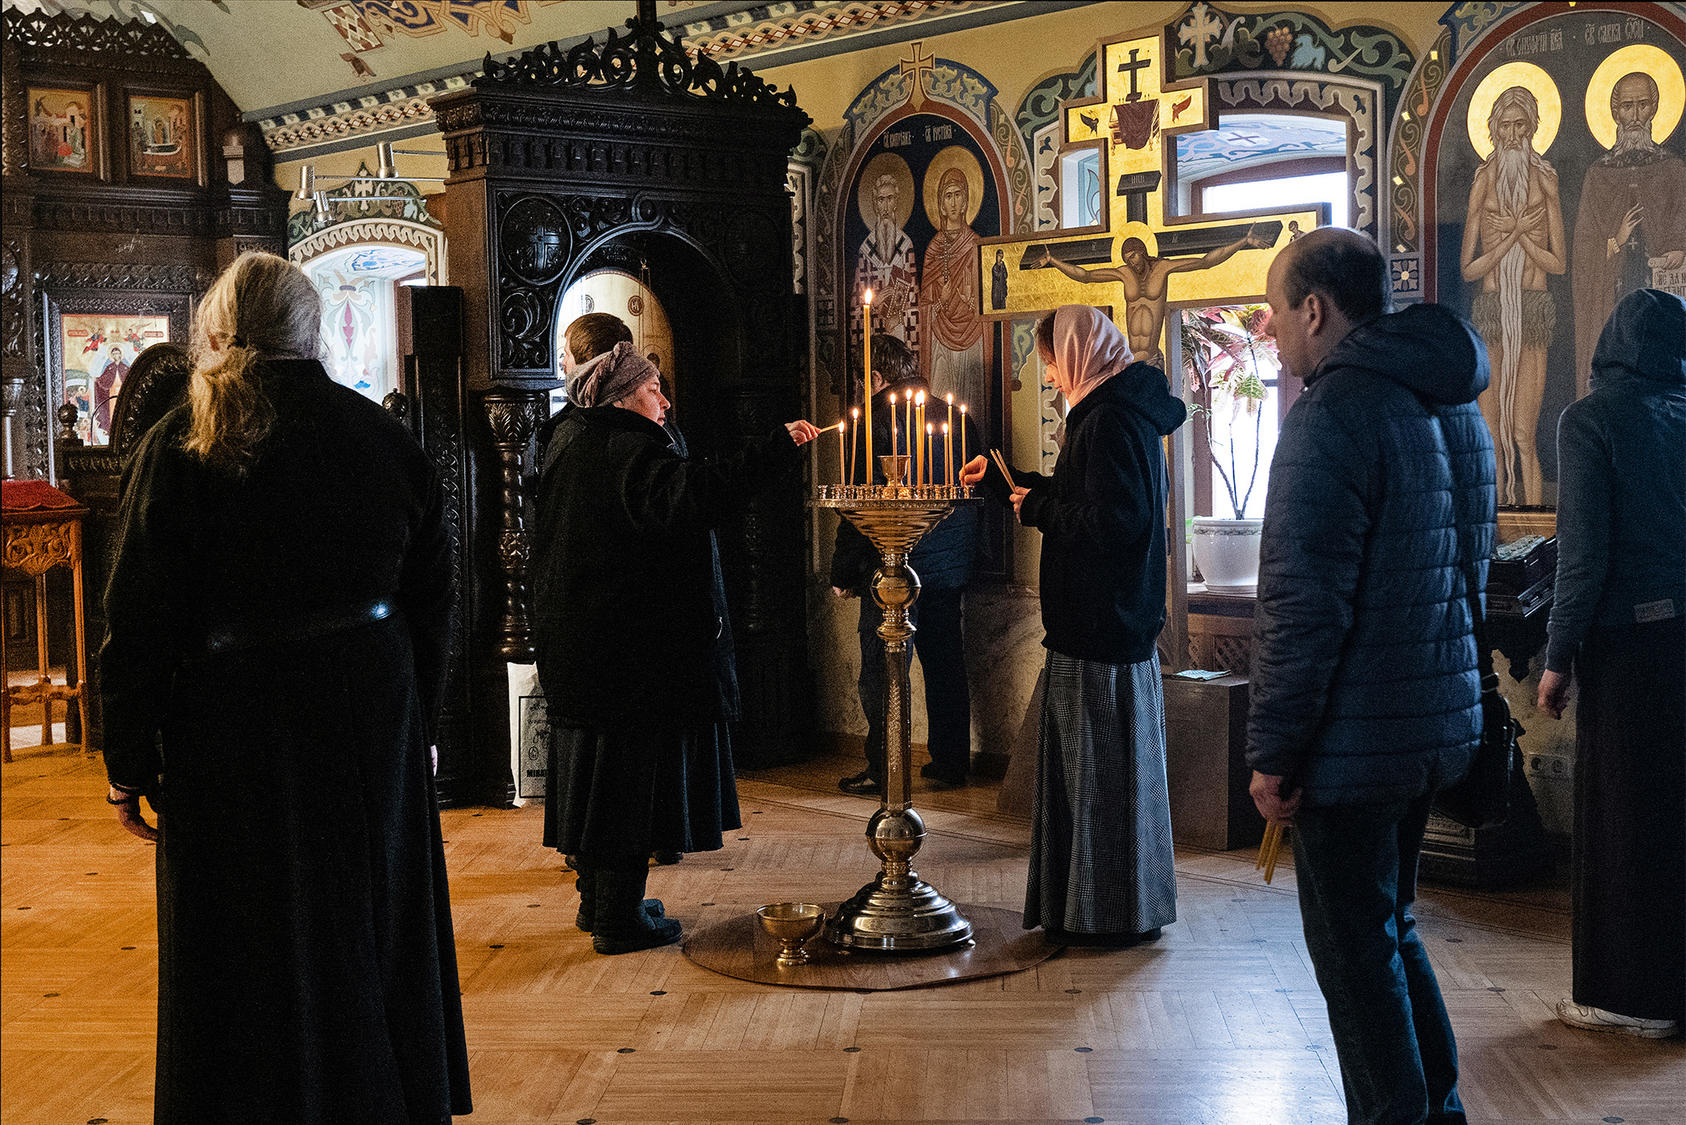 Worshippers light candles at the Monastery of the Caves in Kyiv, one of the holiest sites for Eastern Orthodox Christianity in Ukraine and Russia. March 1, 2022. (Lynsey Addario/The New York Times)